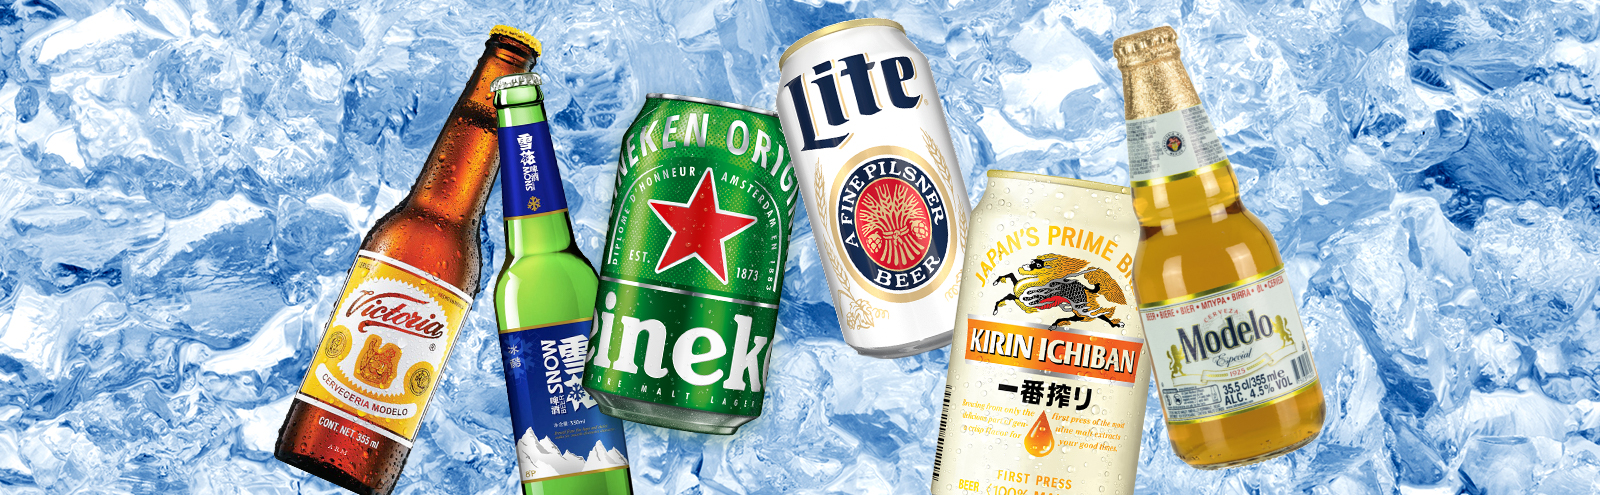 We Re-Tried The World's 10 Biggest Beer Brands -- Here Are Our Notes